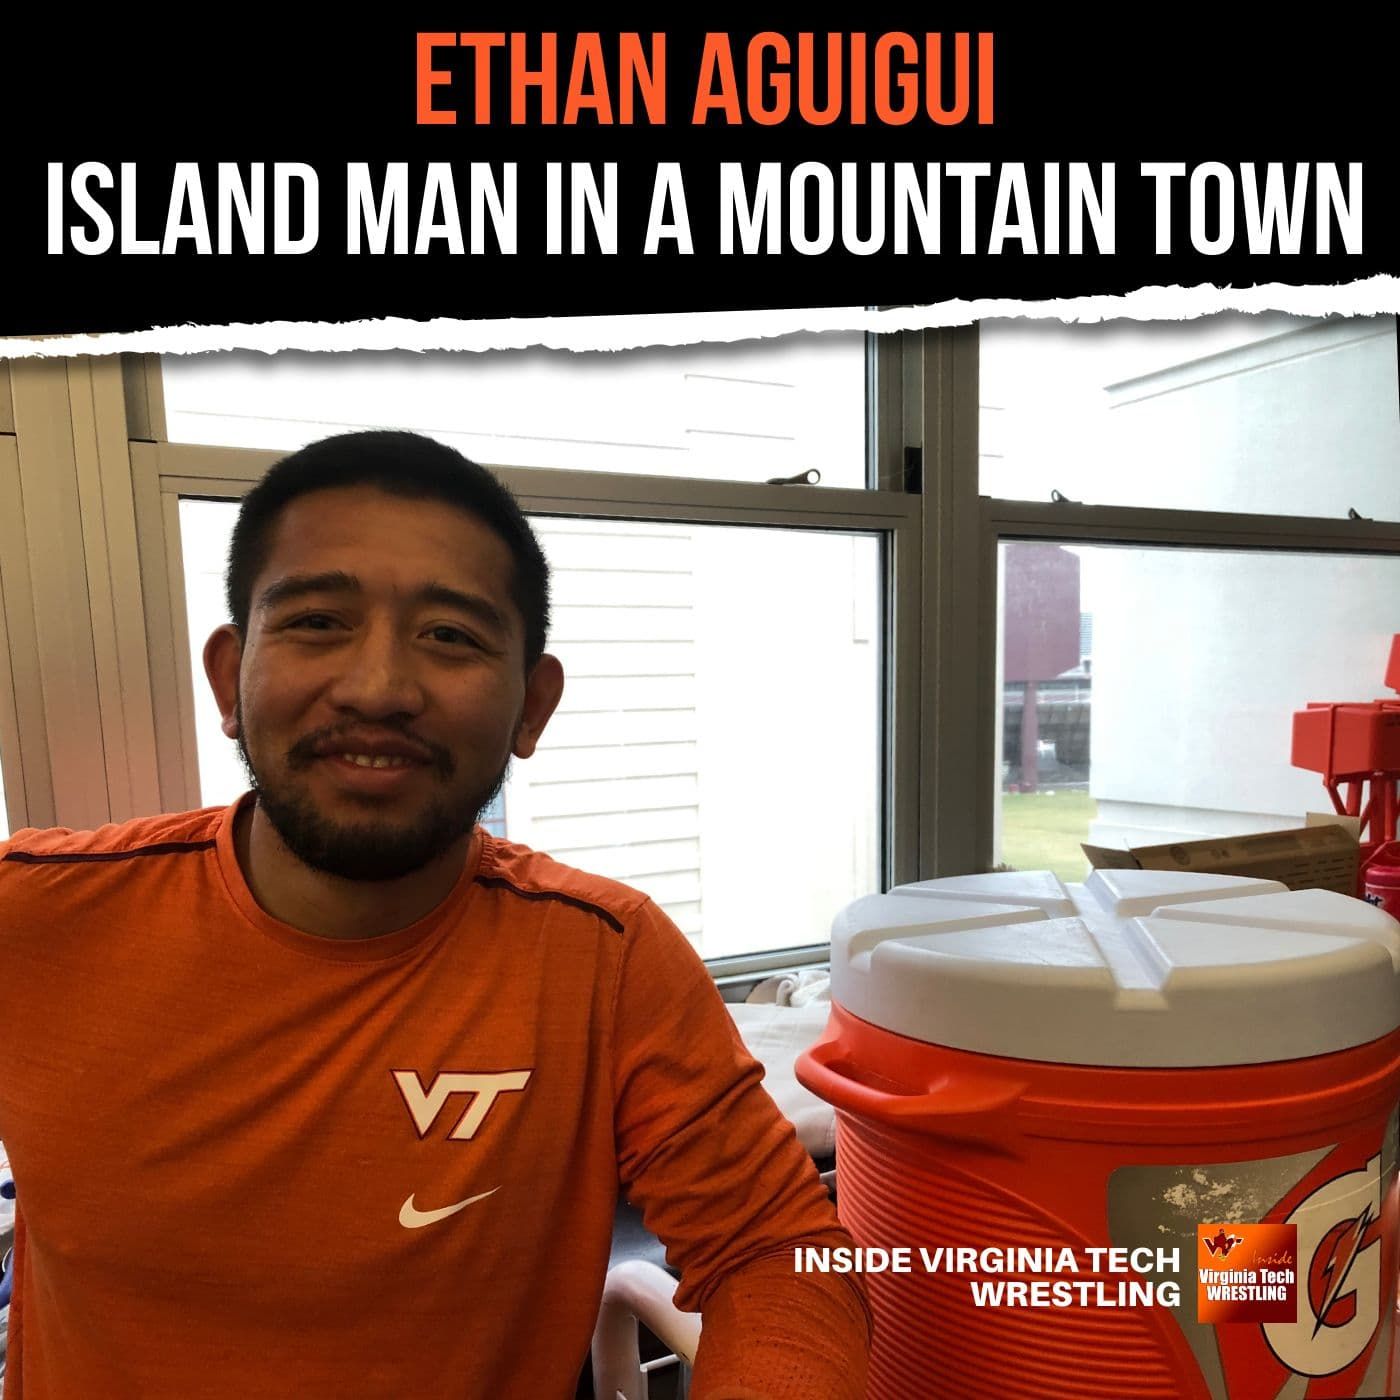 Hokie wrestling SID Ethan Aguigui’s nearly 8,000-mile road from Guam to Blacksburg - VT109